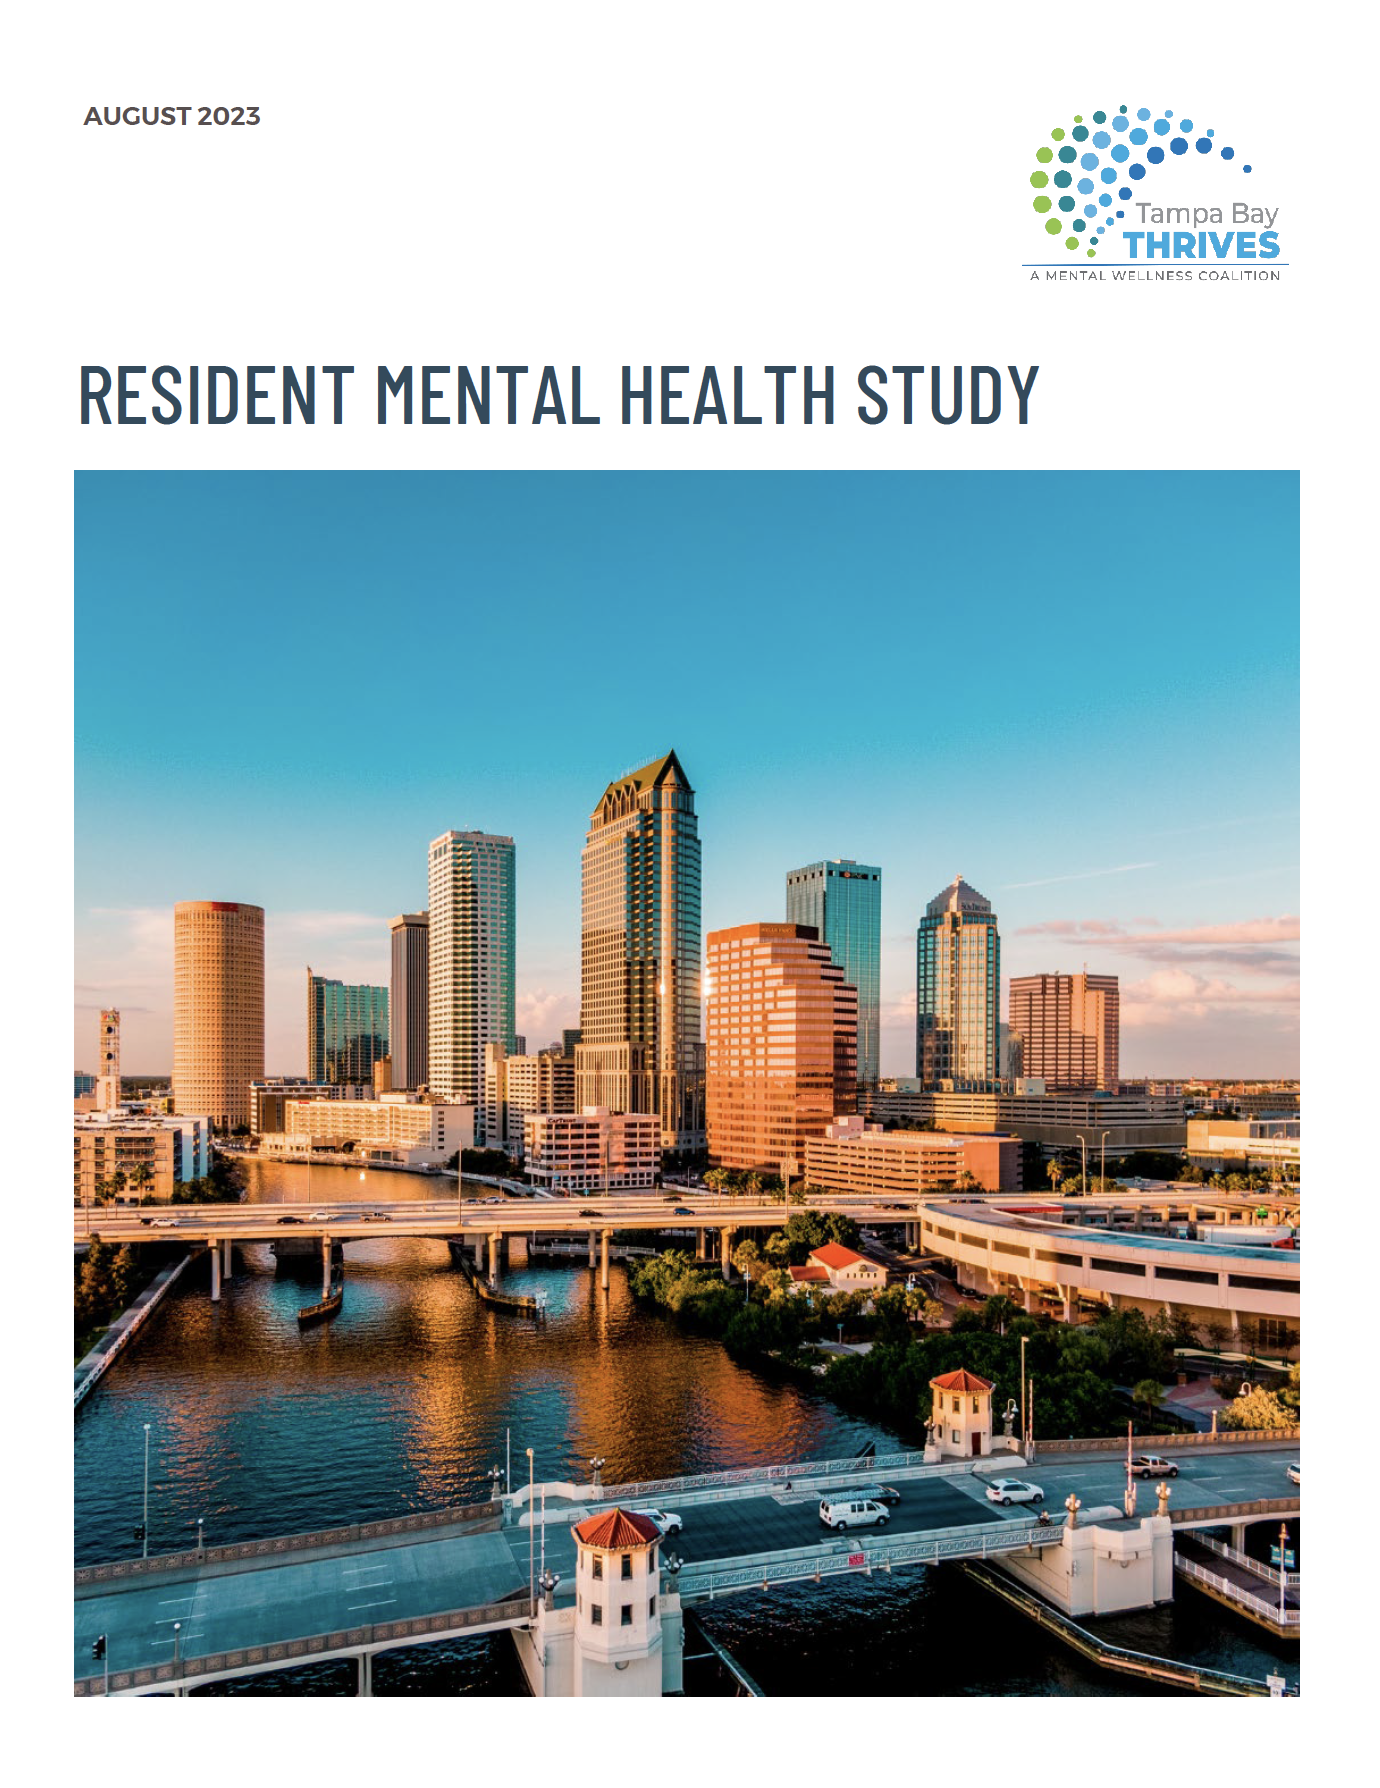 State of the Region’s Mental Health